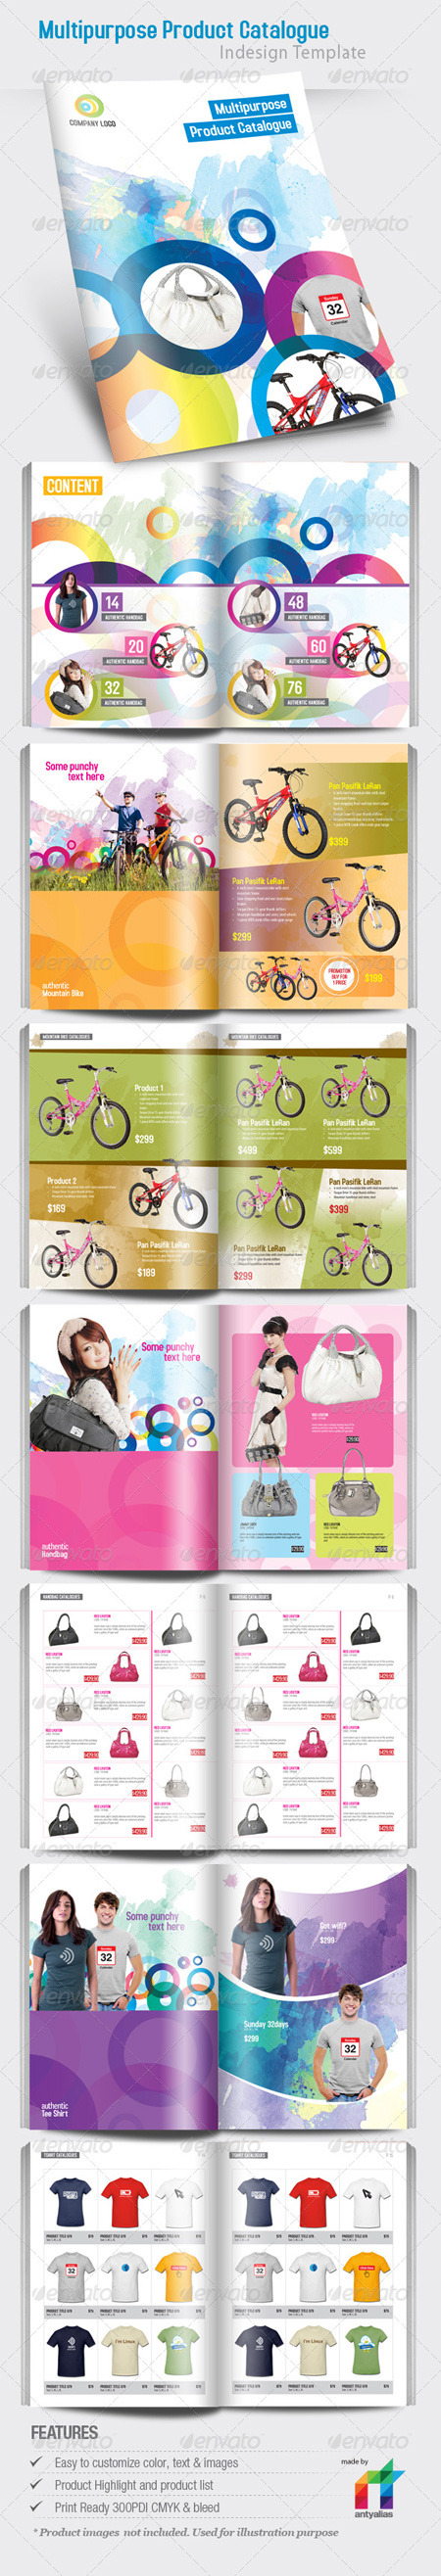 Multipurpose Product Catalogue Indesign Template 160367